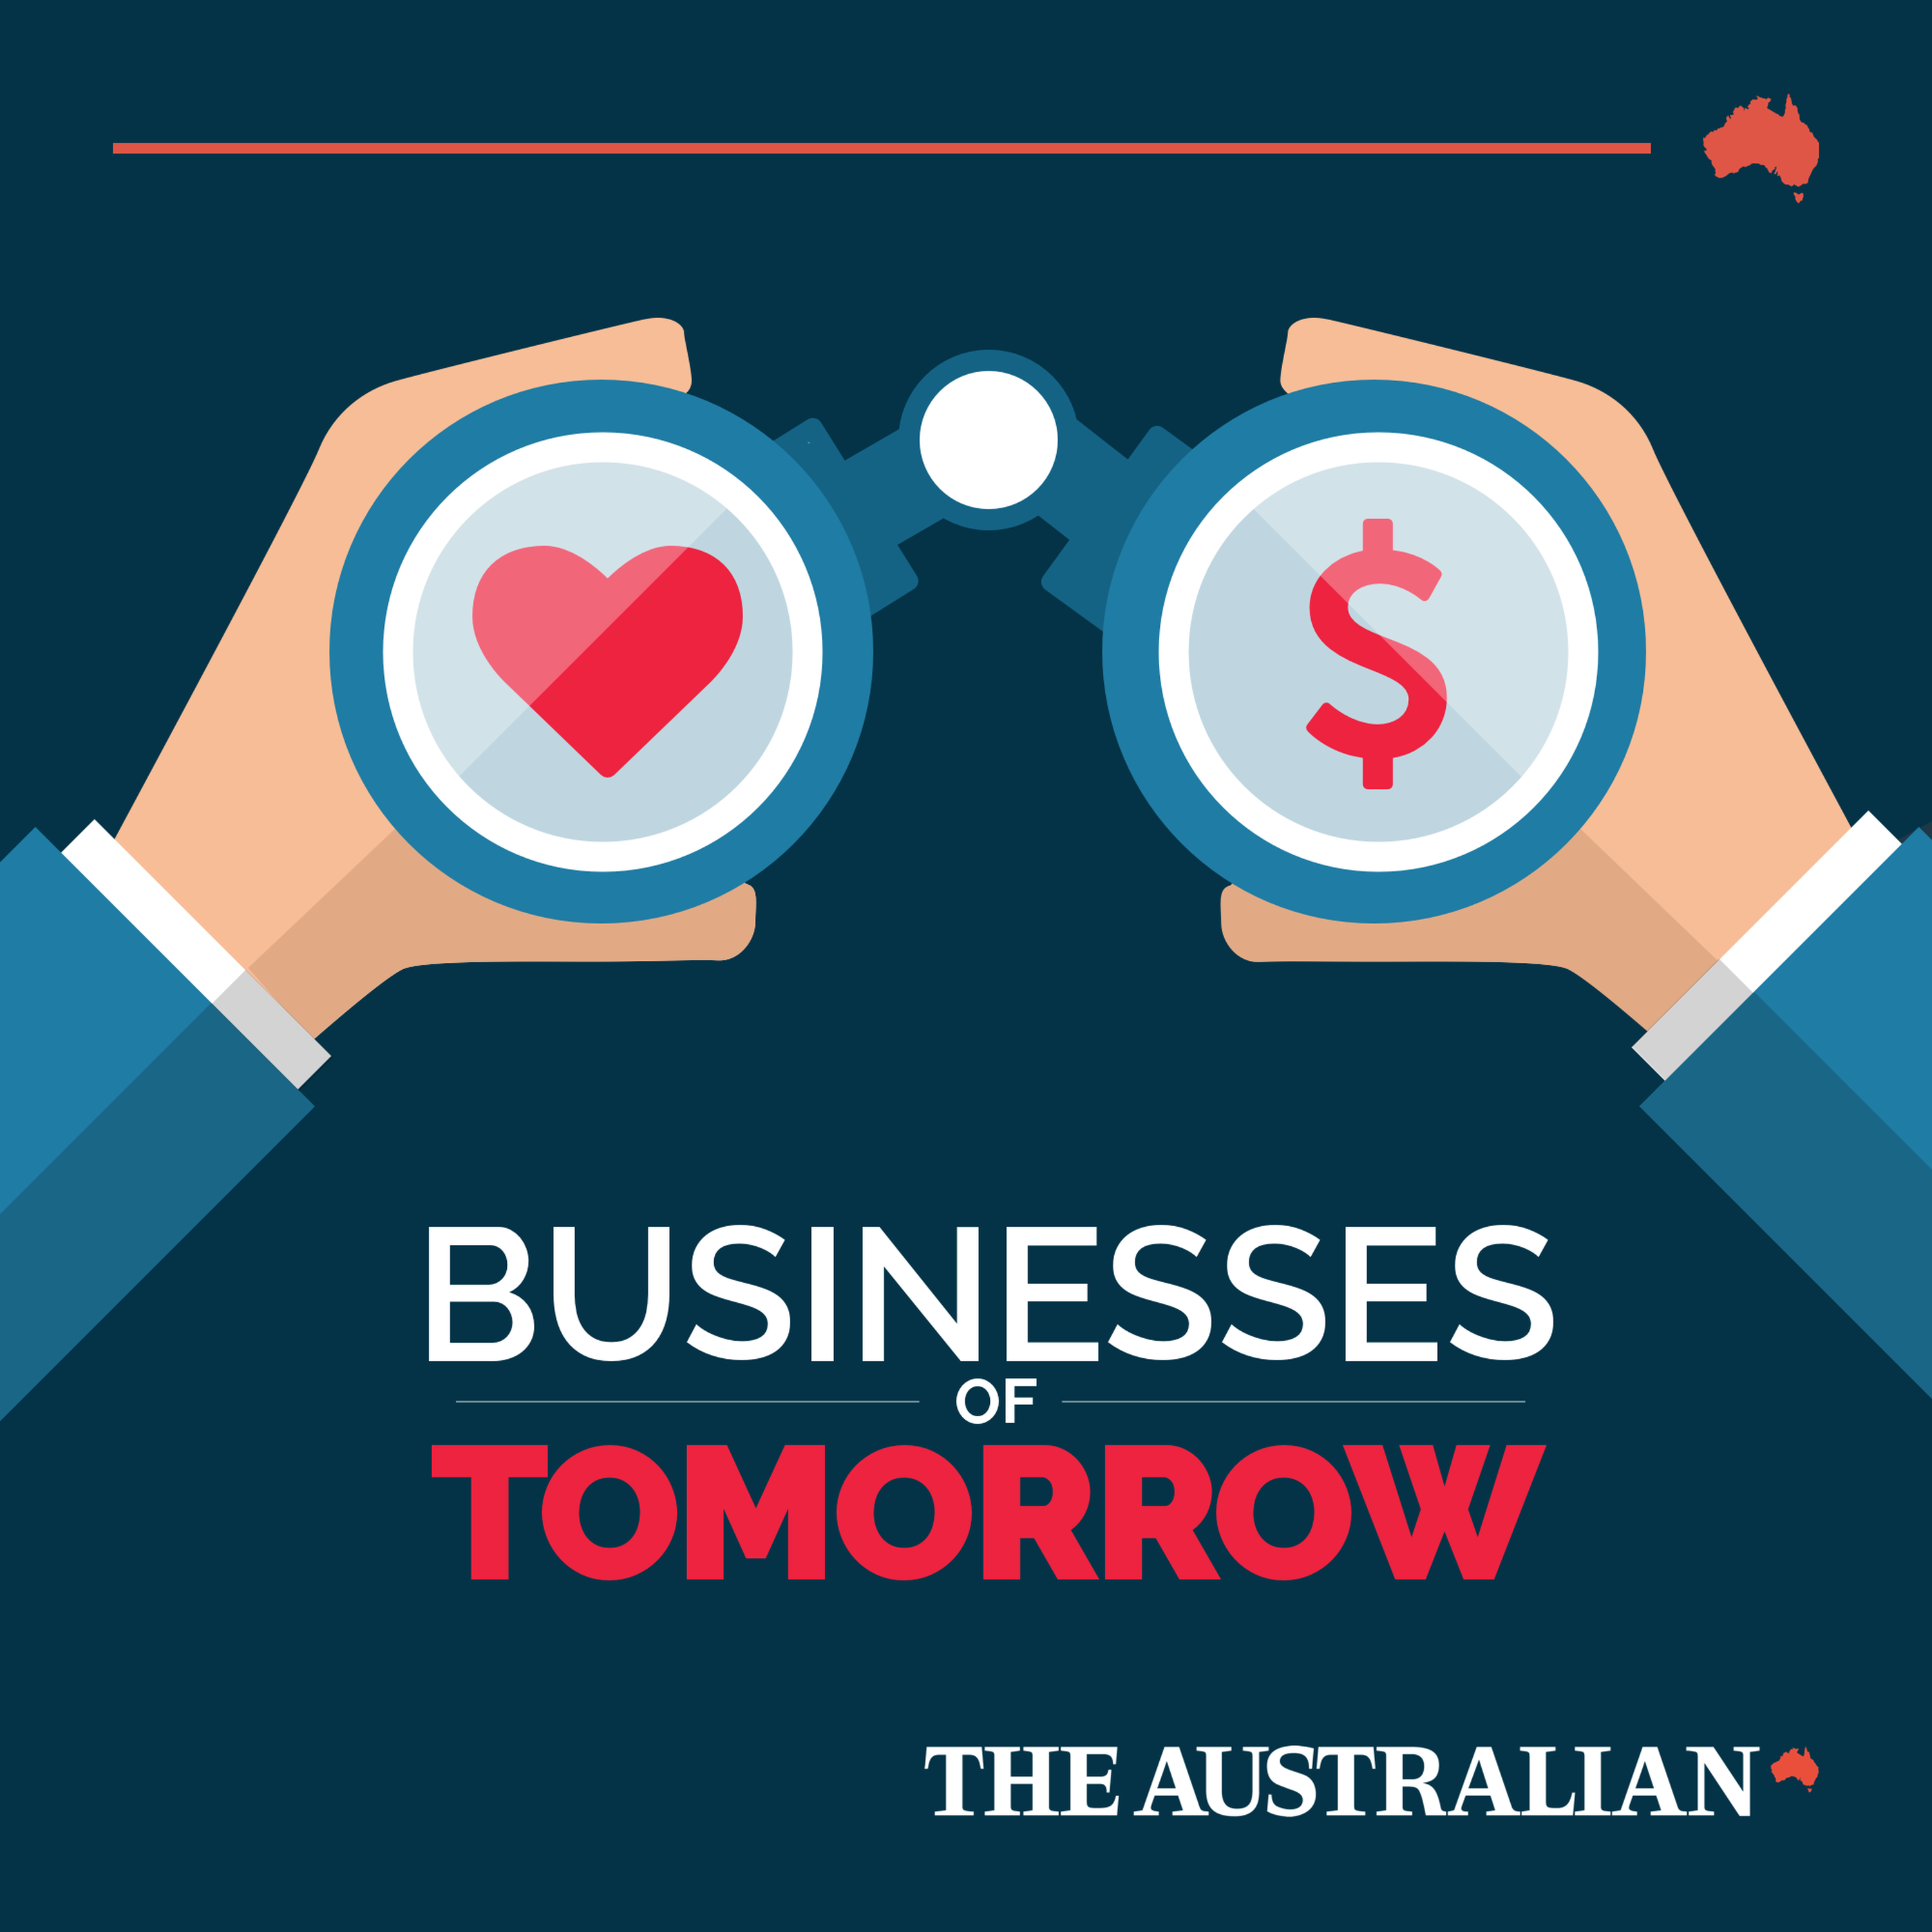 Episode 4- The businesses of tomorrow attempt to transform their companies